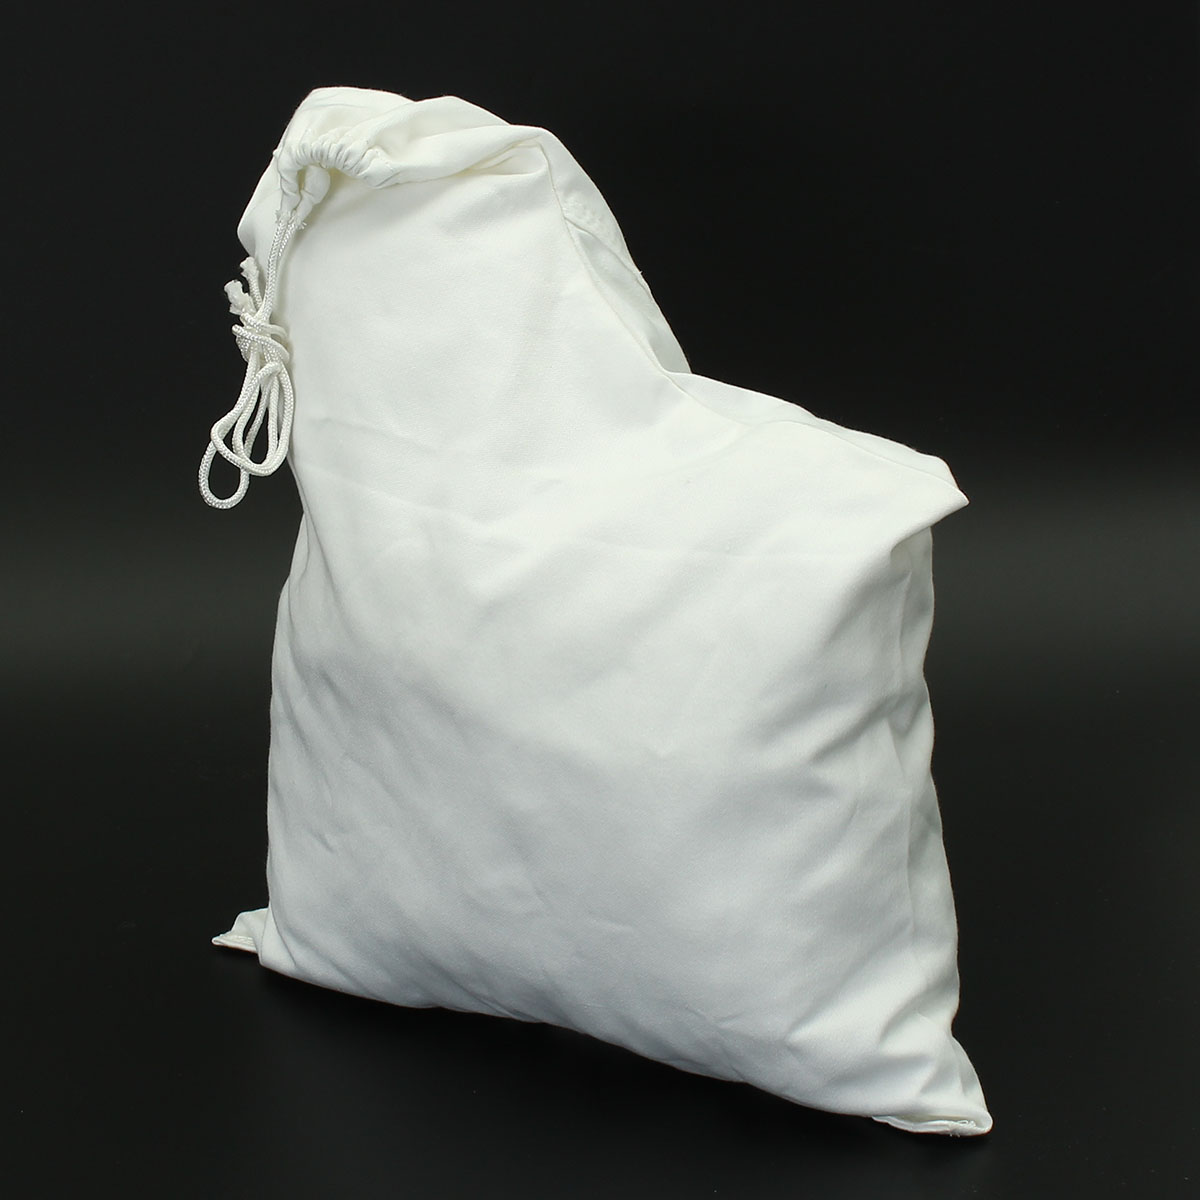 Polyester-729-White-Leaf-Blower-Vac-Bag-Sack-Replacement-Vacuum-Bag-for-Model-2595-1258021